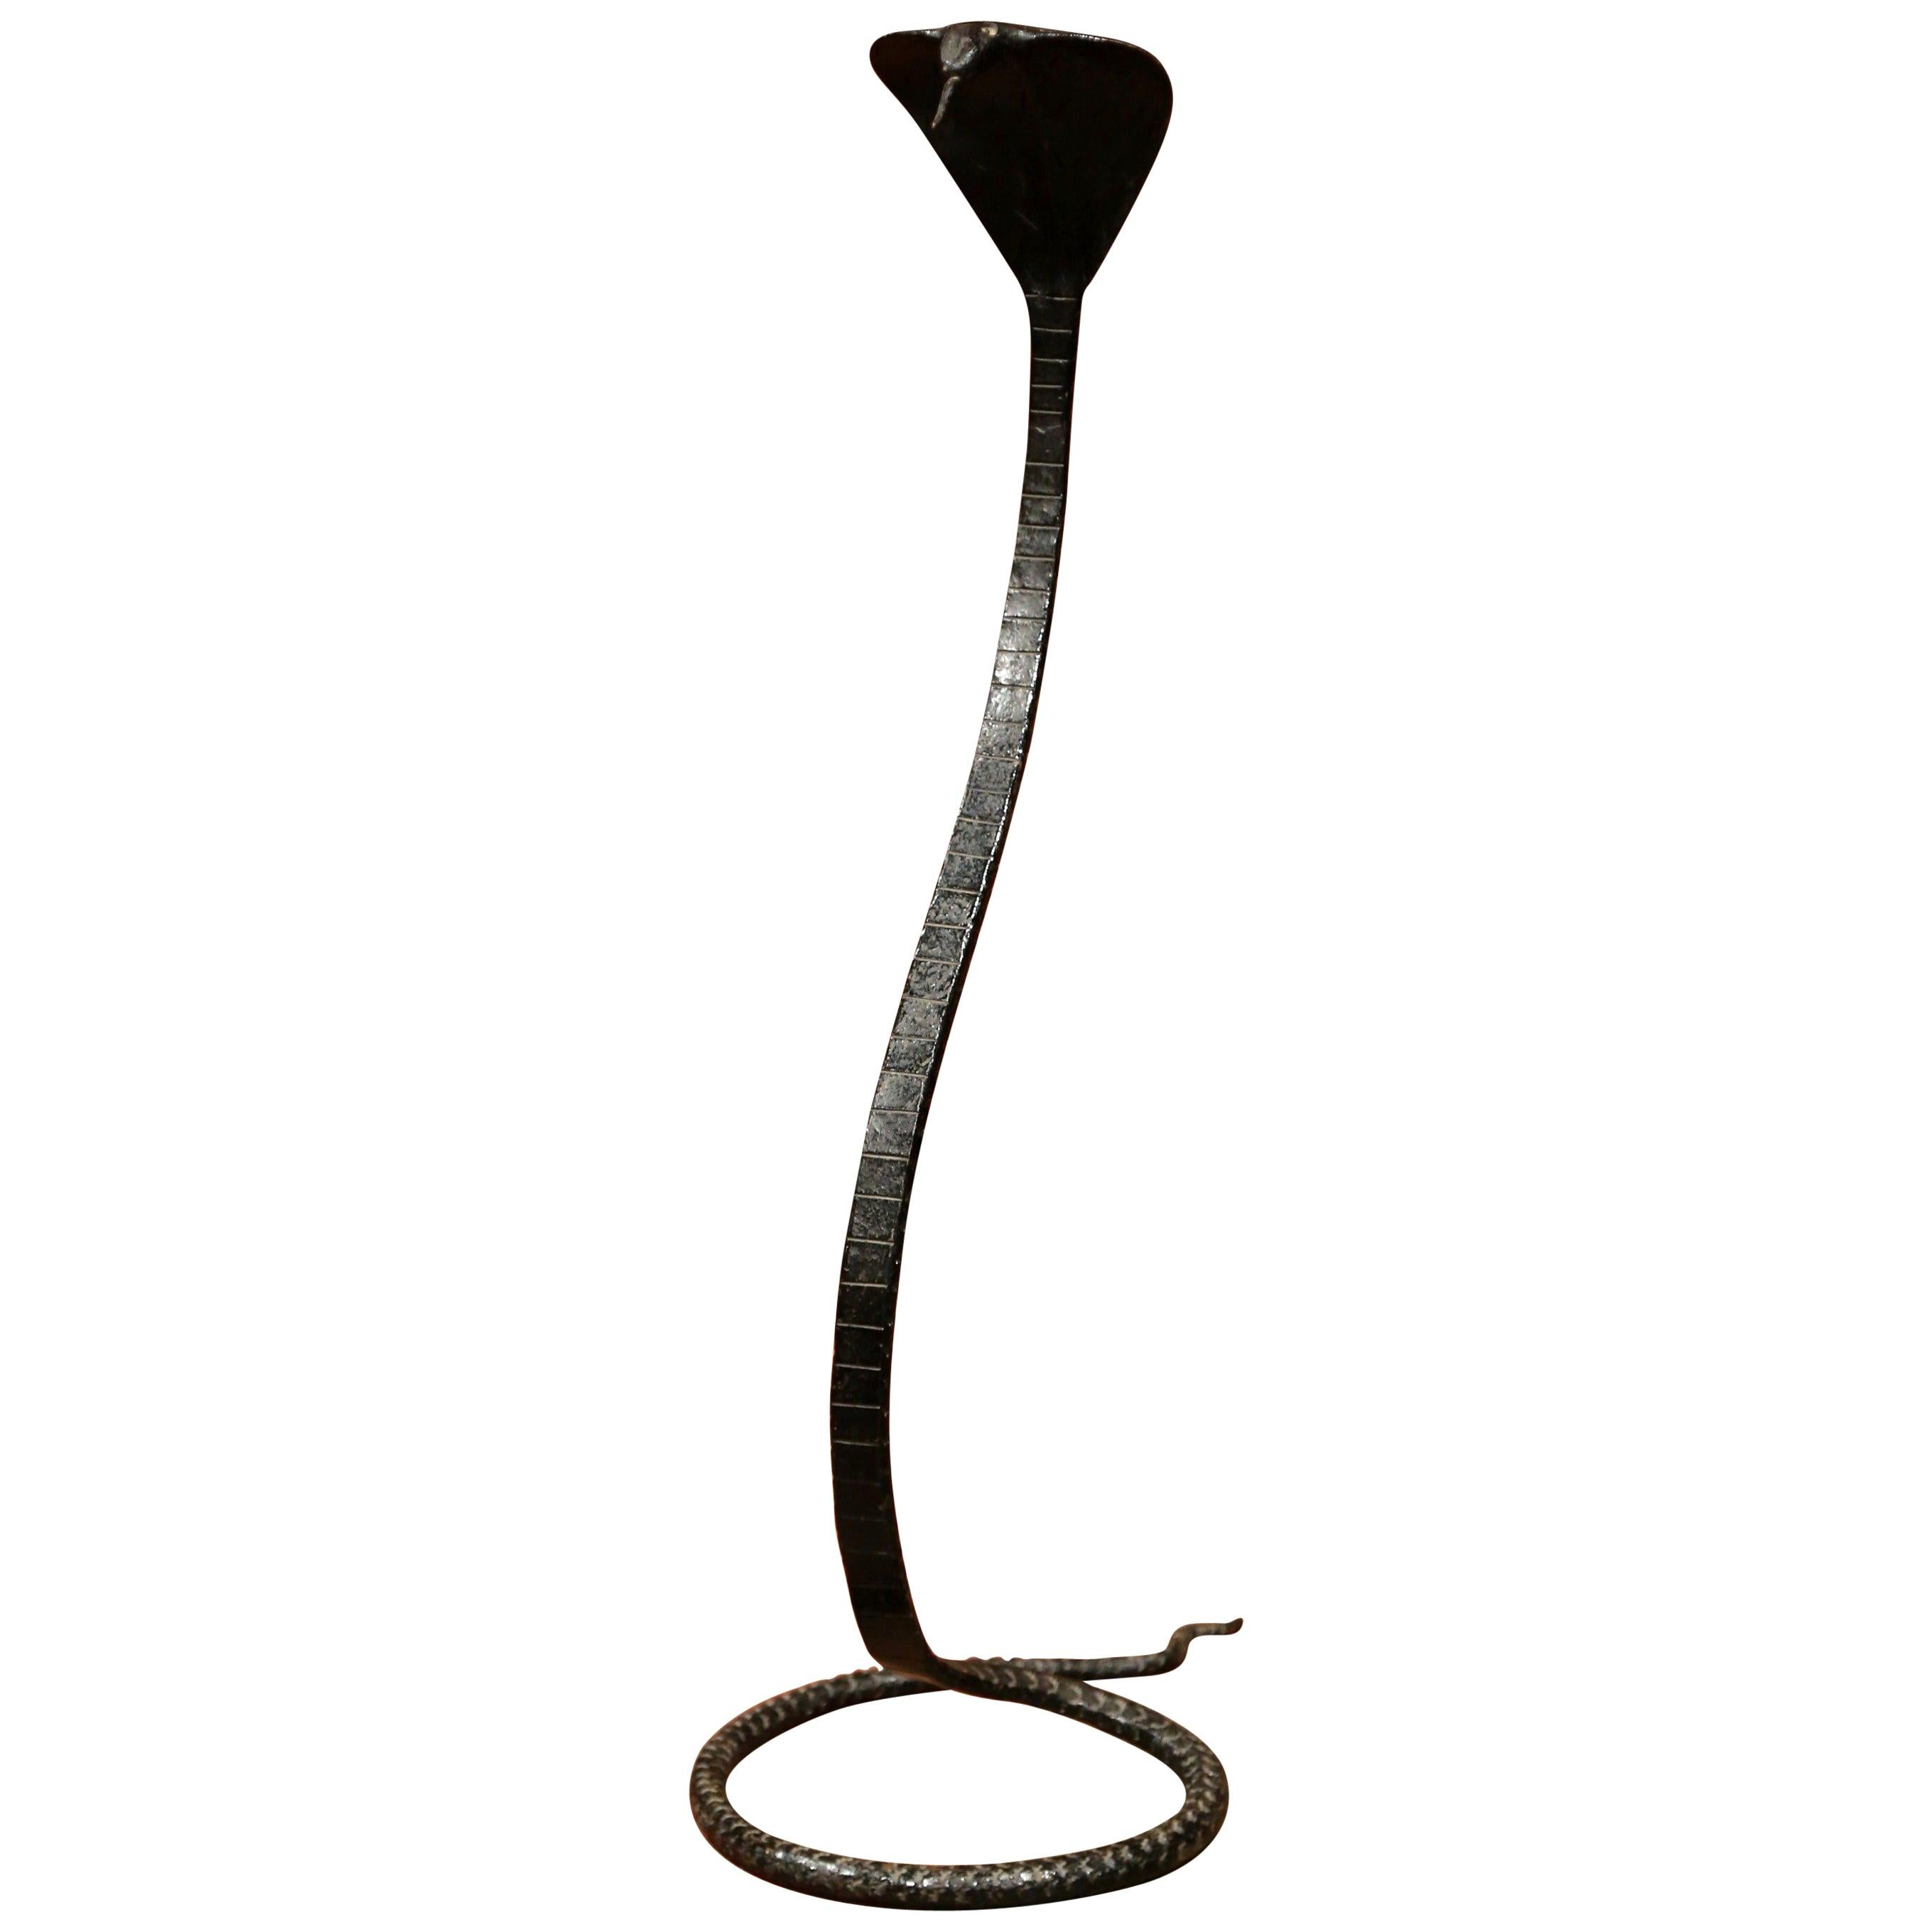 Mid-20th Century French Forged Iron Rattle Snake Sculpture